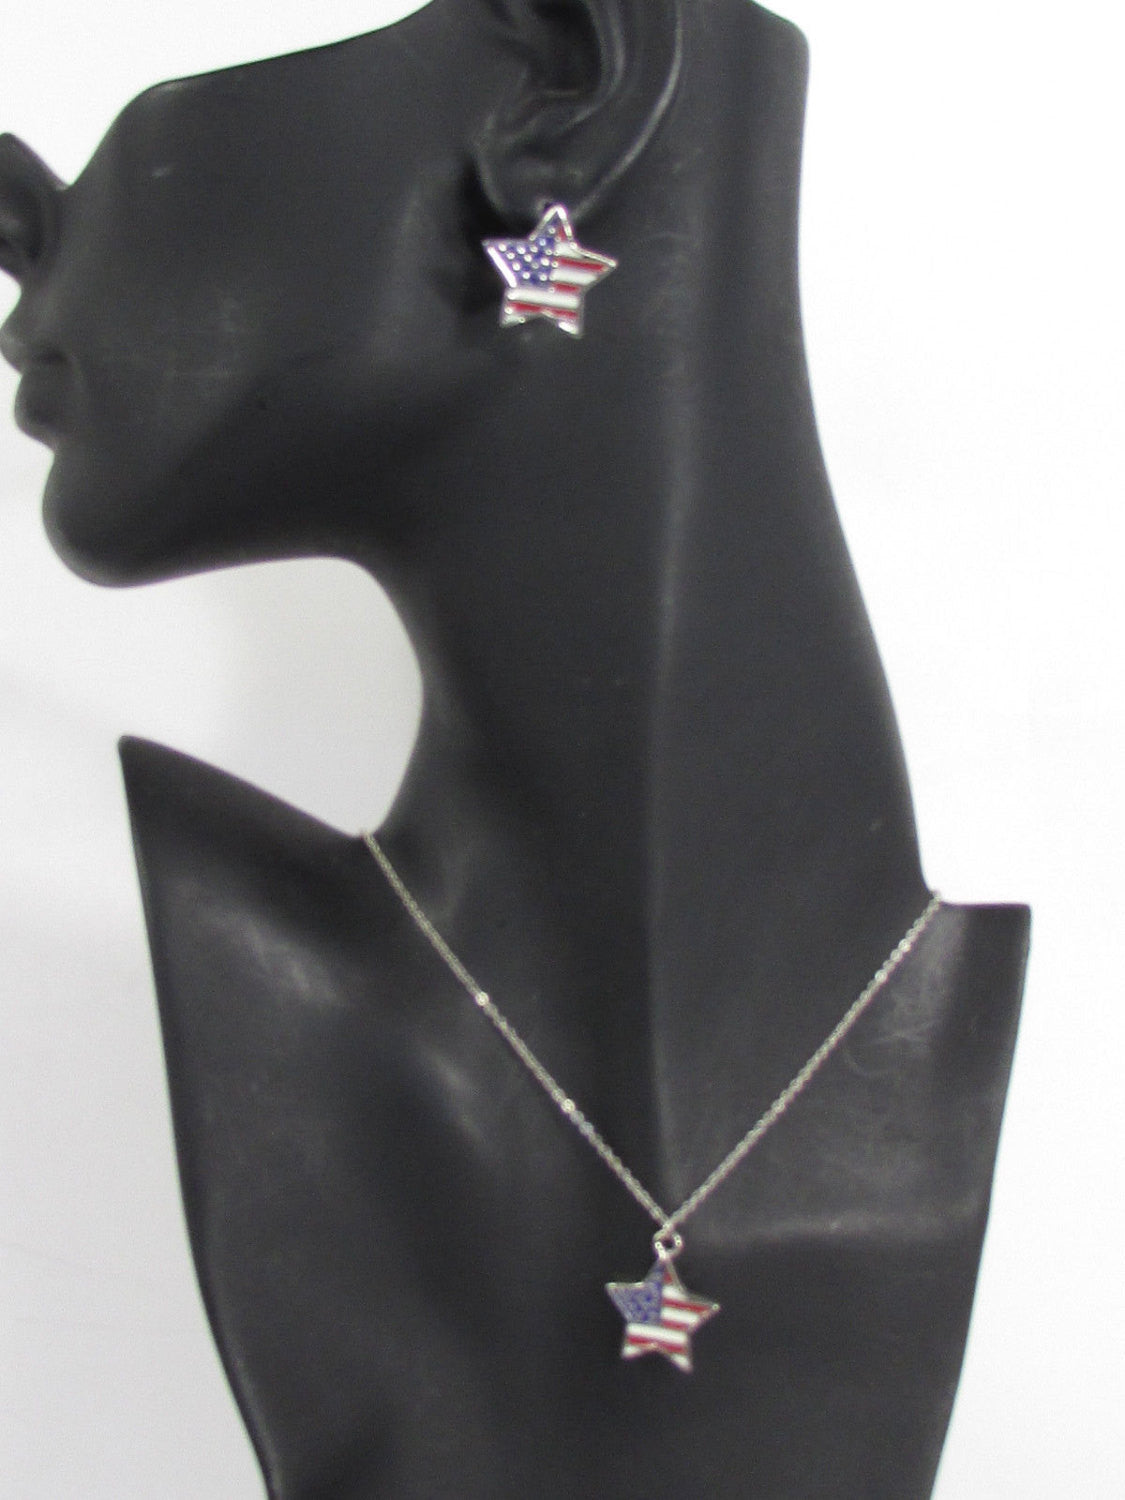 USA American Flag Star/Square/Heart Silver Metal Necklace + Matching Earring Set Women - alwaystyle4you - 1